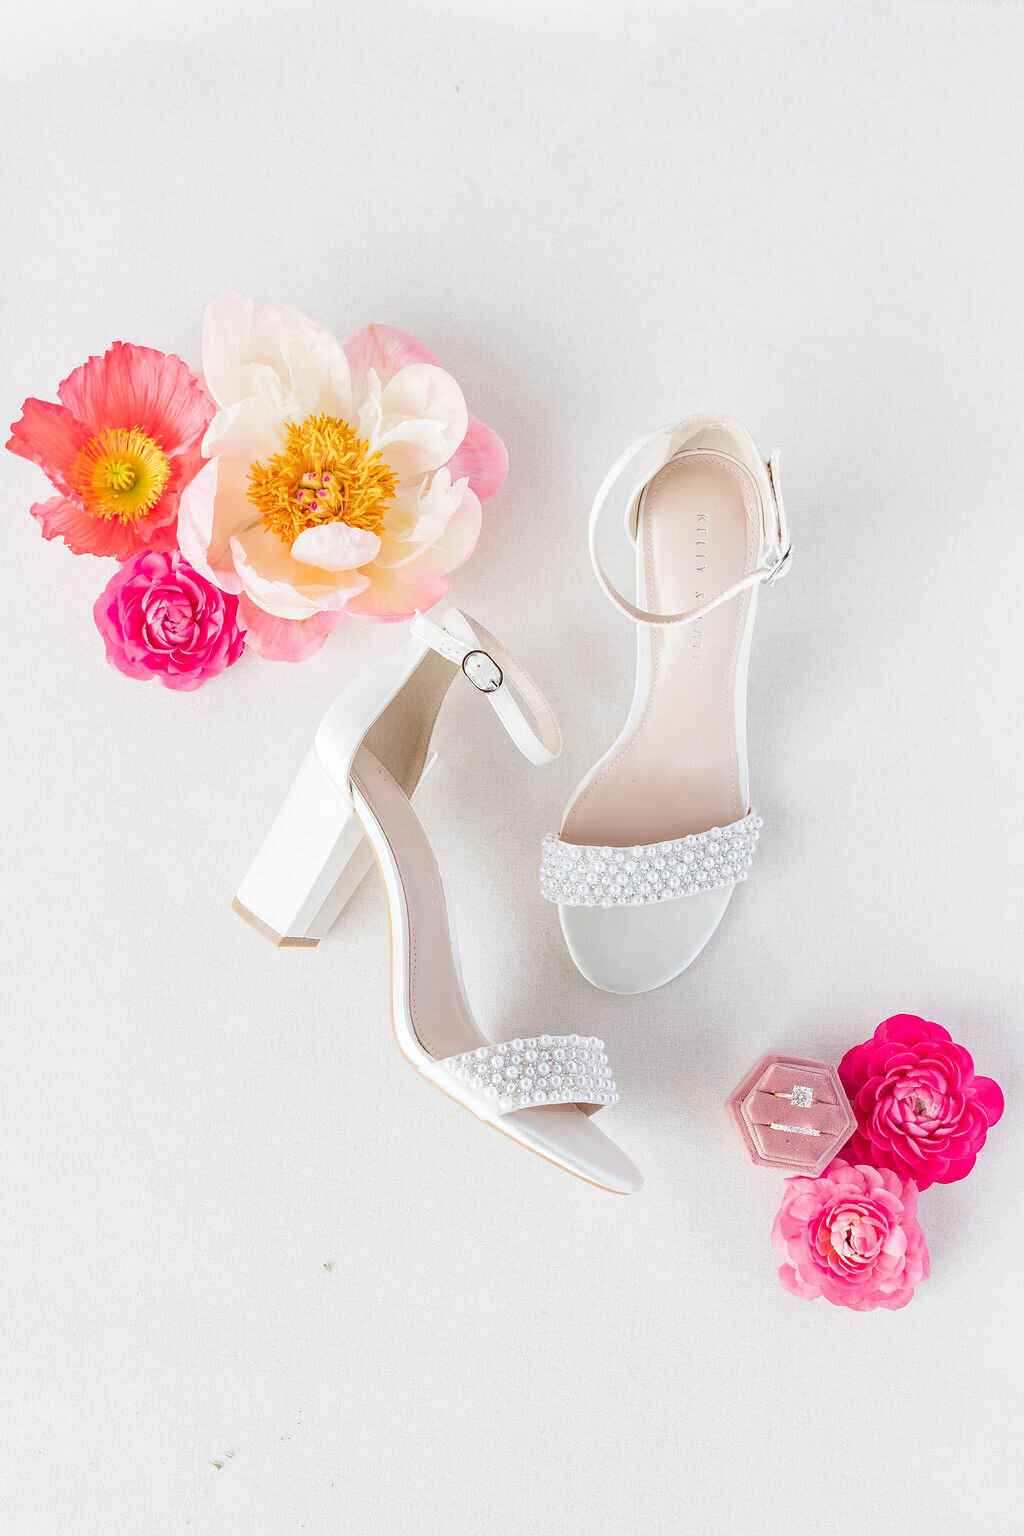 Wedding shoes and florals